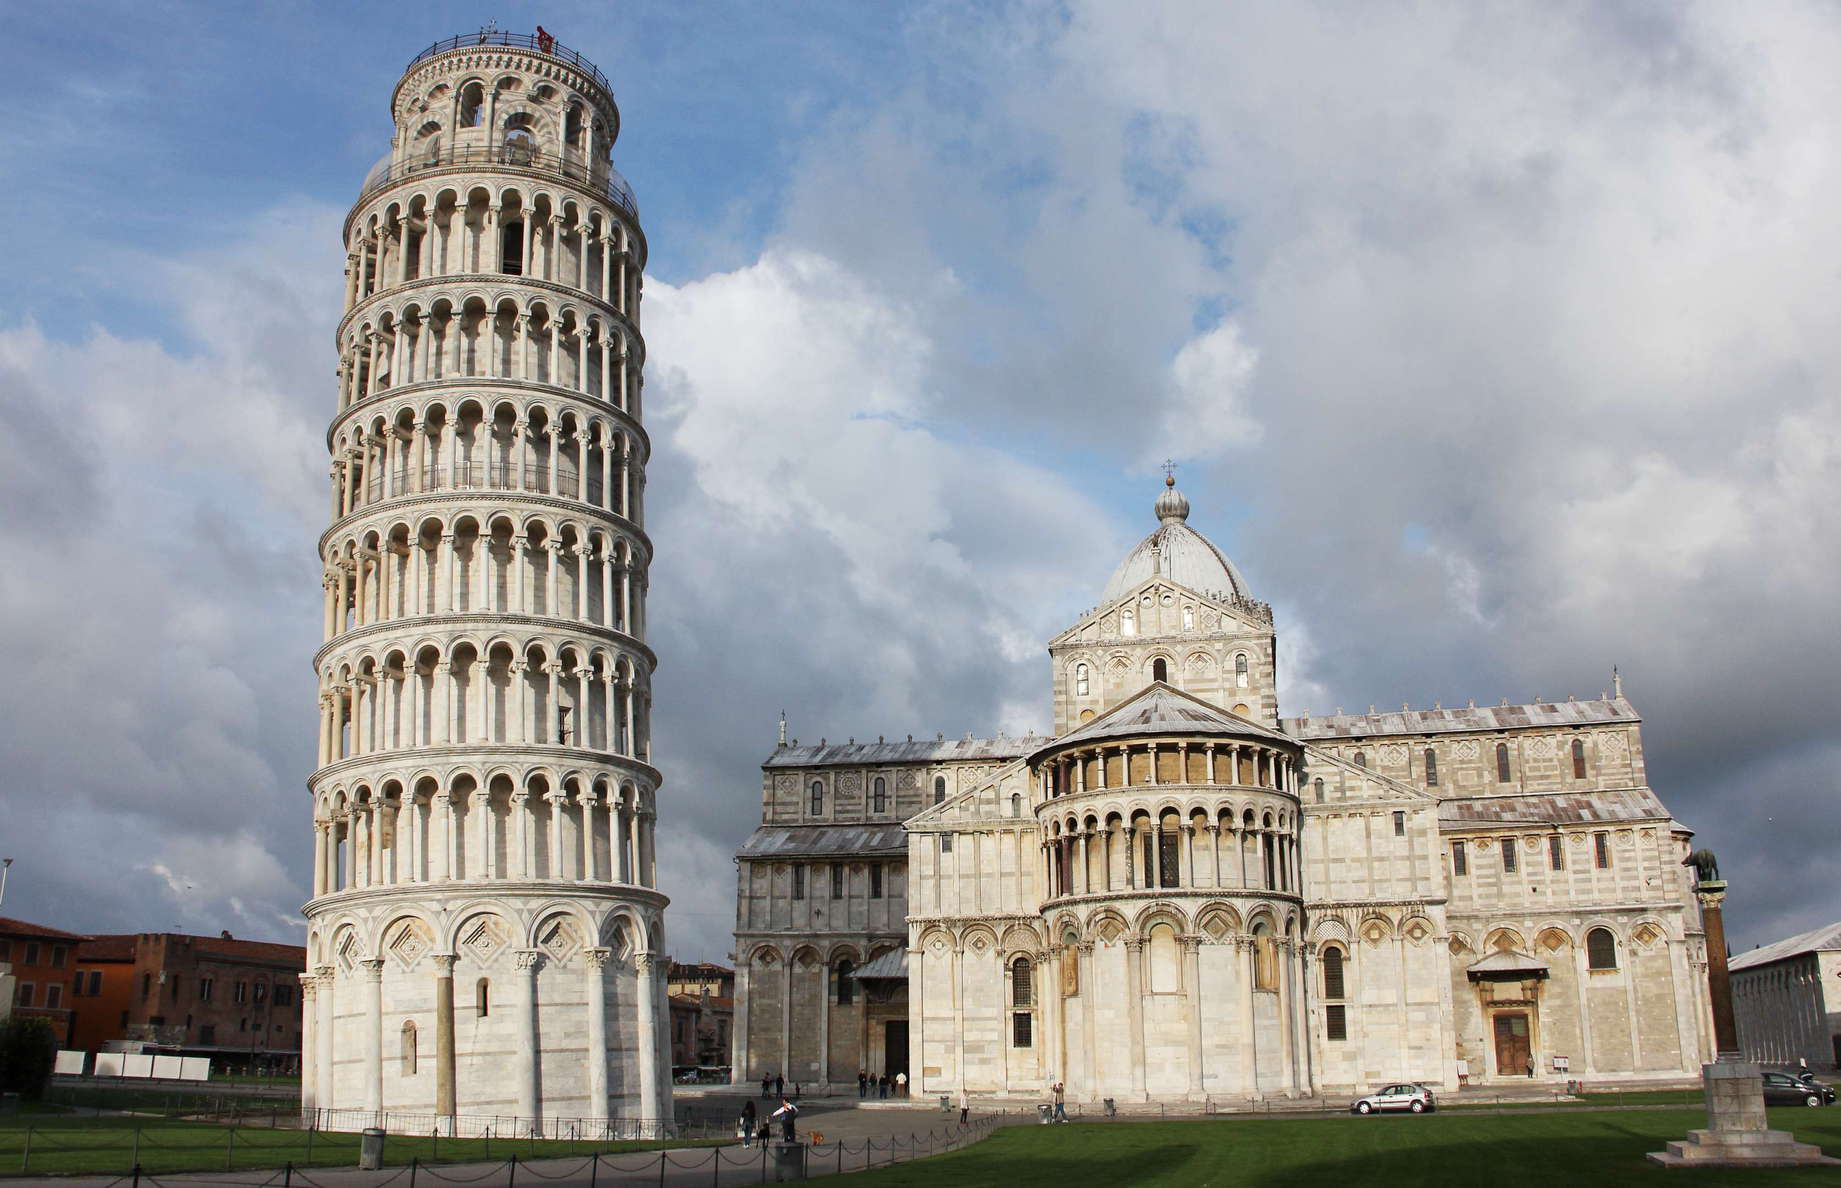 Pisa | Leaning tower and cathedral